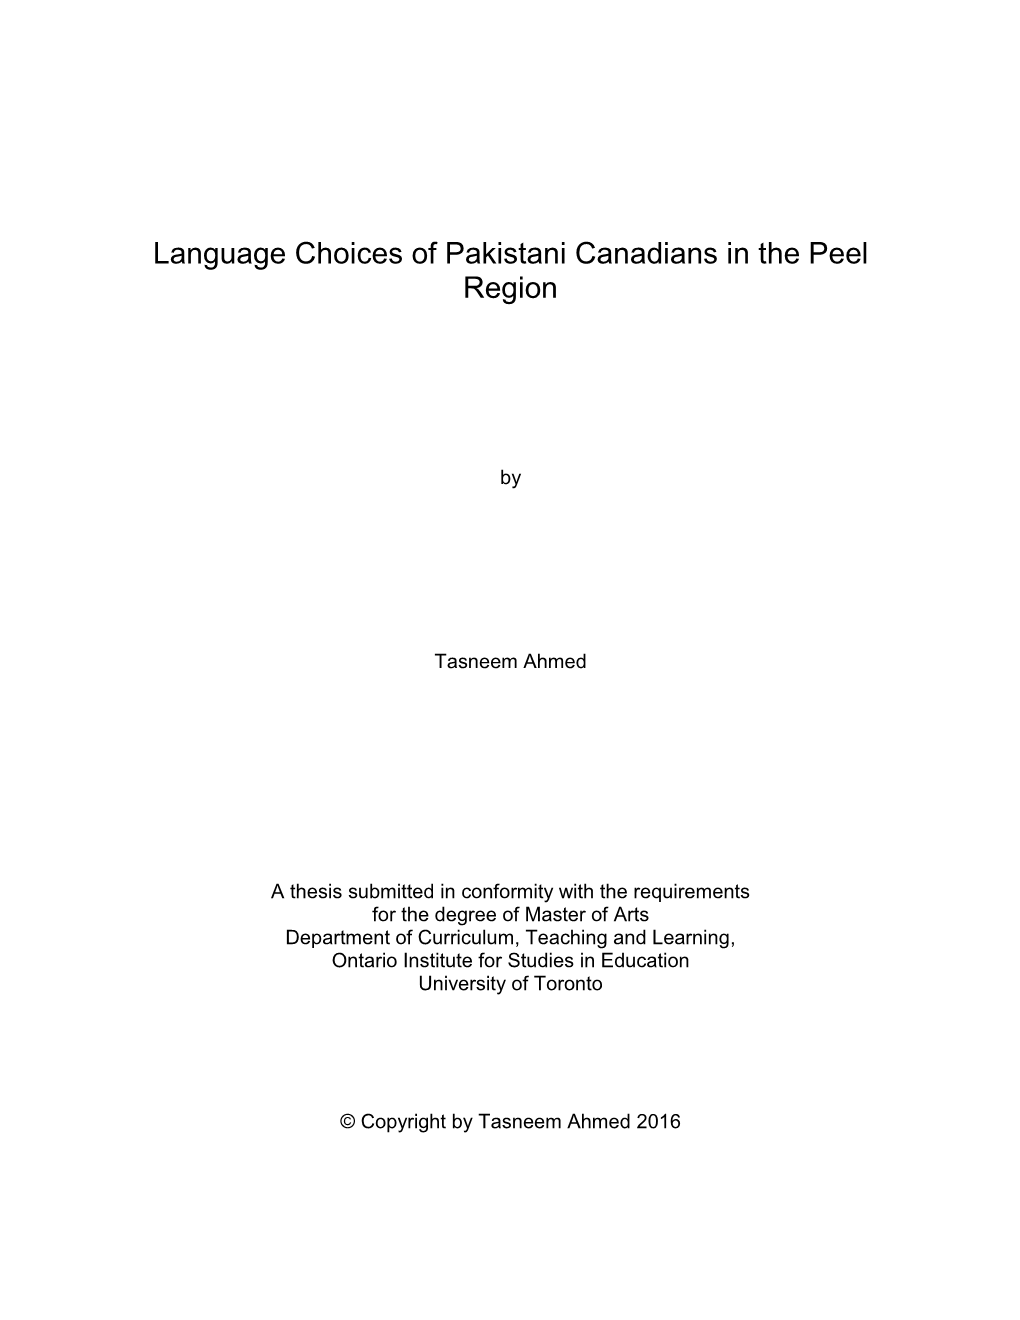 Language Choices of Pakistani Canadians in the Peel Region